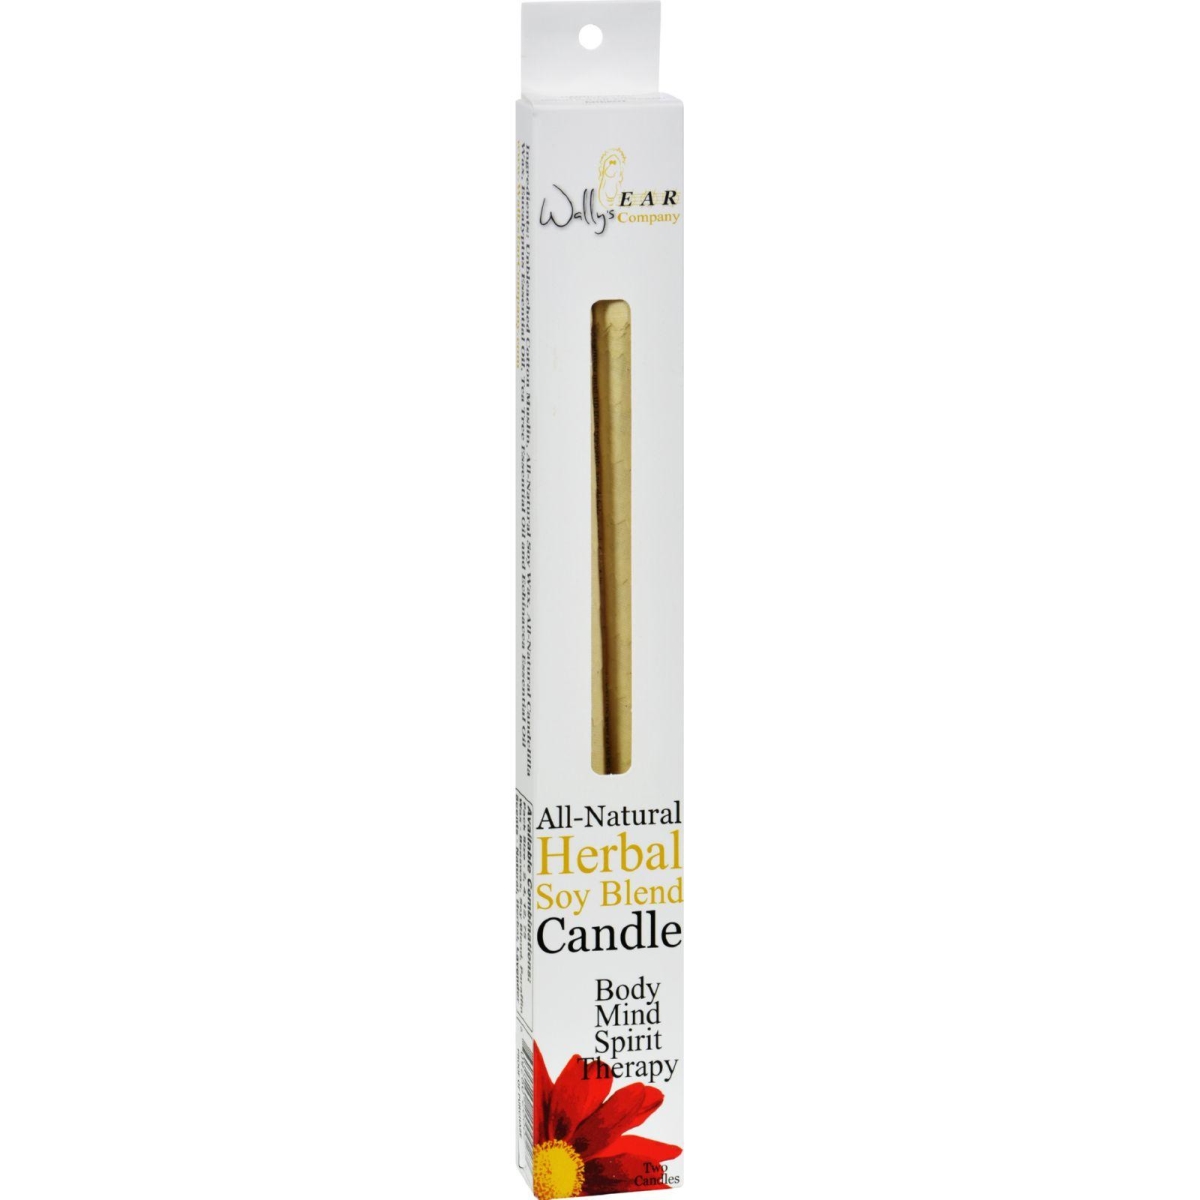 Hg0115915 Herbal Paraffin Ear Candle - Pack Of 2